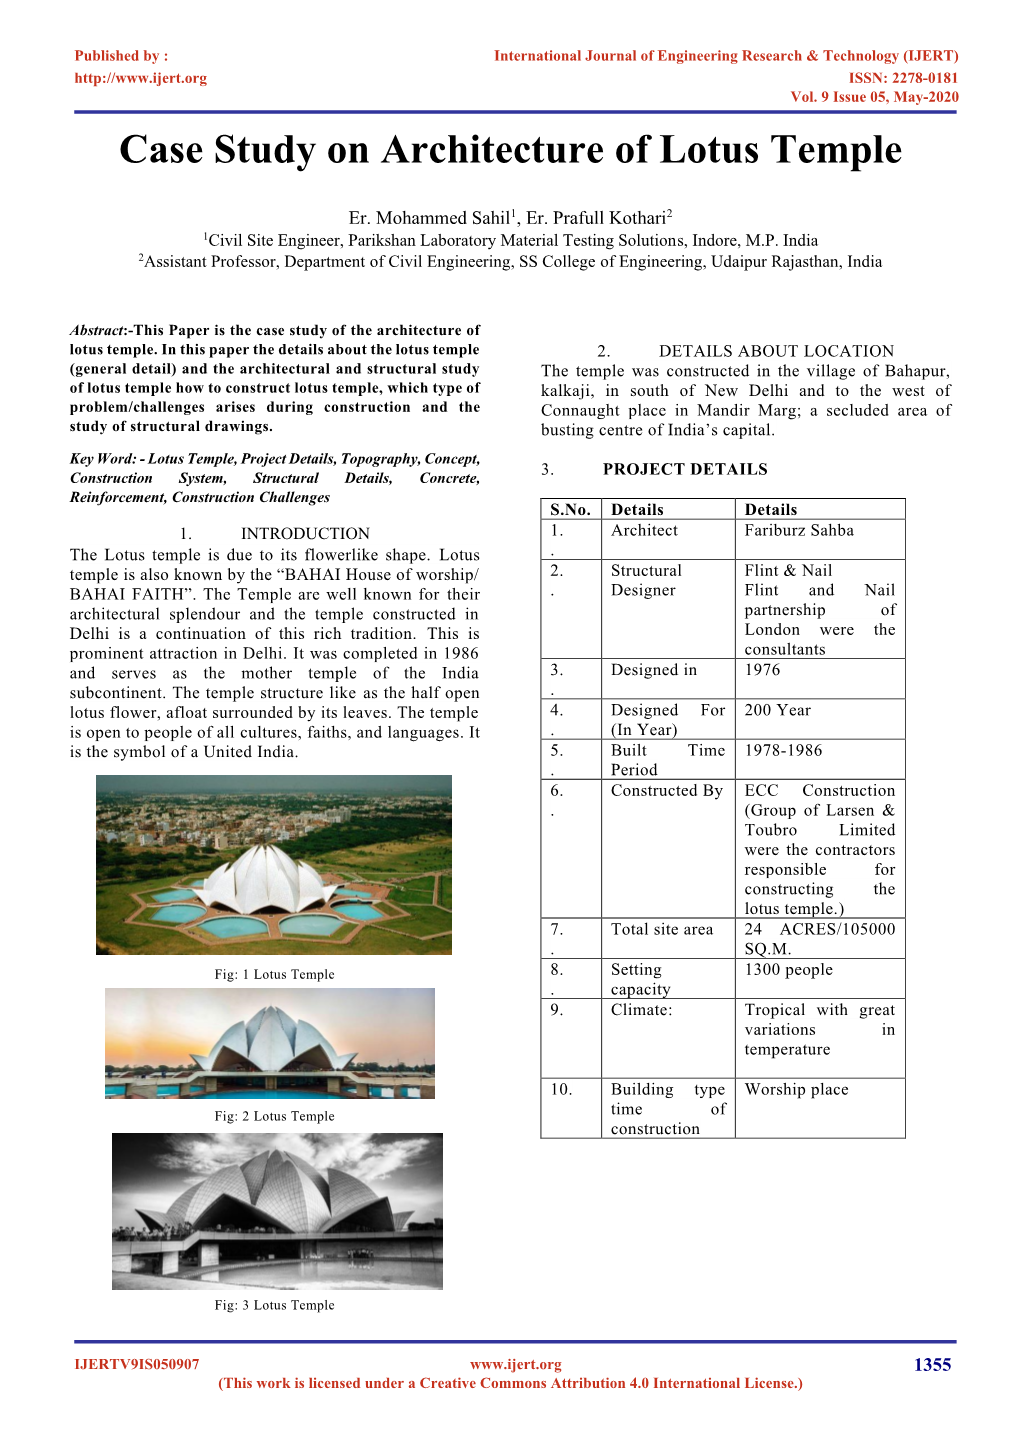 Case Study on Architecture of Lotus Temple